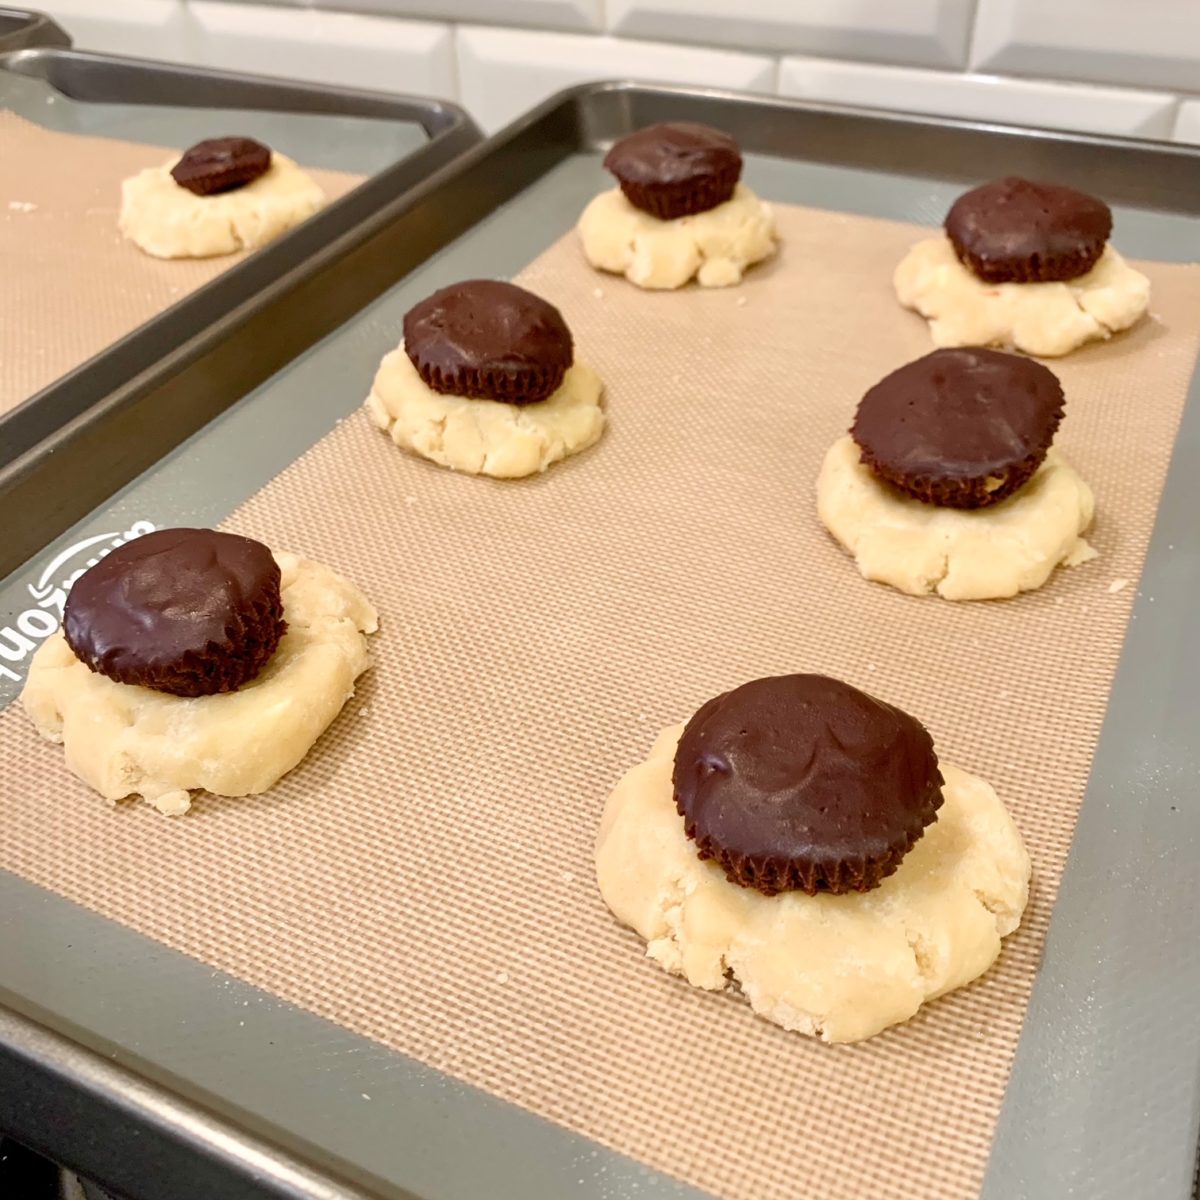 Amy Schumer’s Peanut Butter Cup Cookies